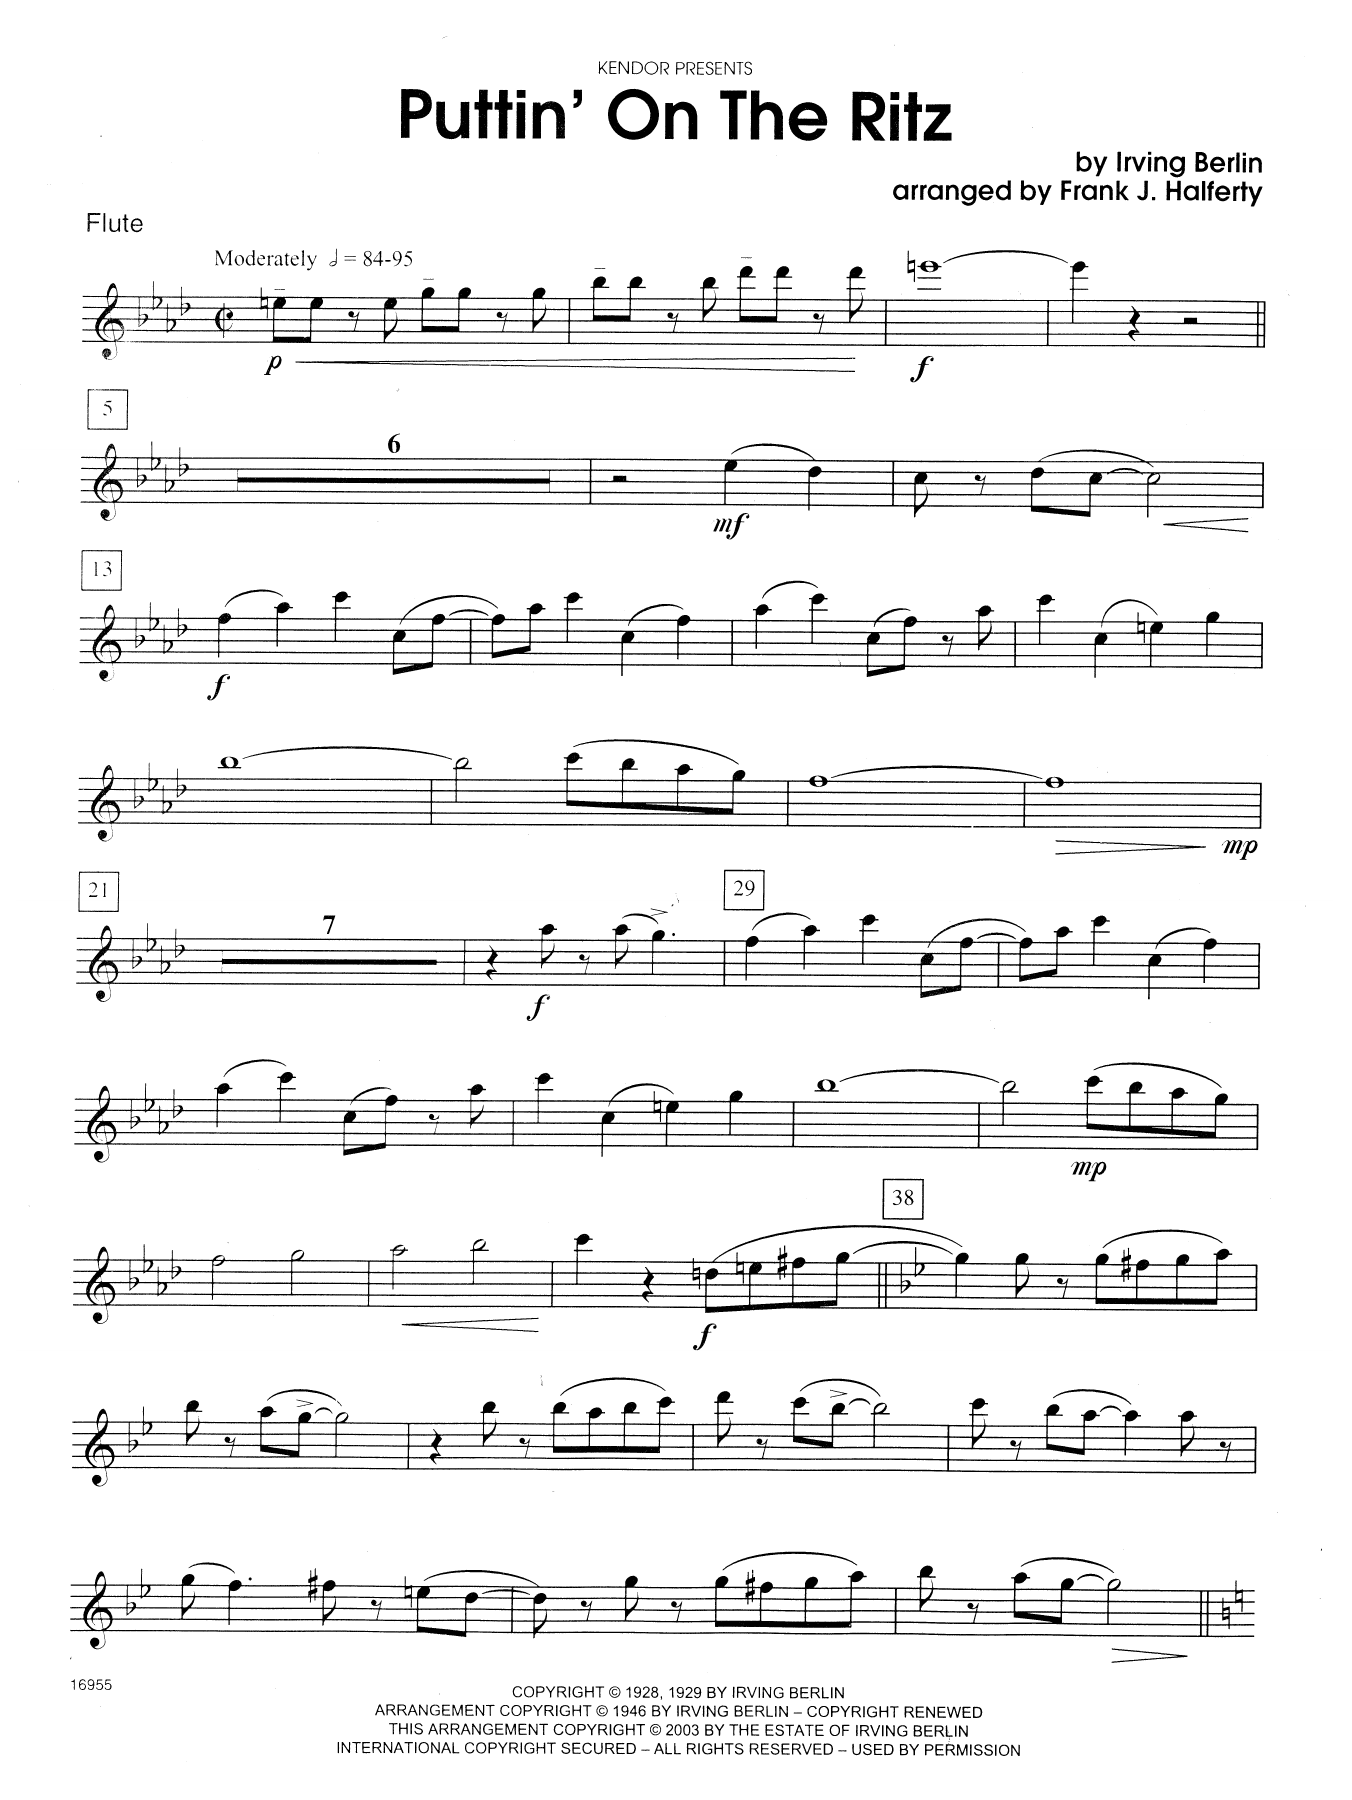 Frank J. Halferty Puttin' on the Ritz - Flute sheet music notes and chords. Download Printable PDF.